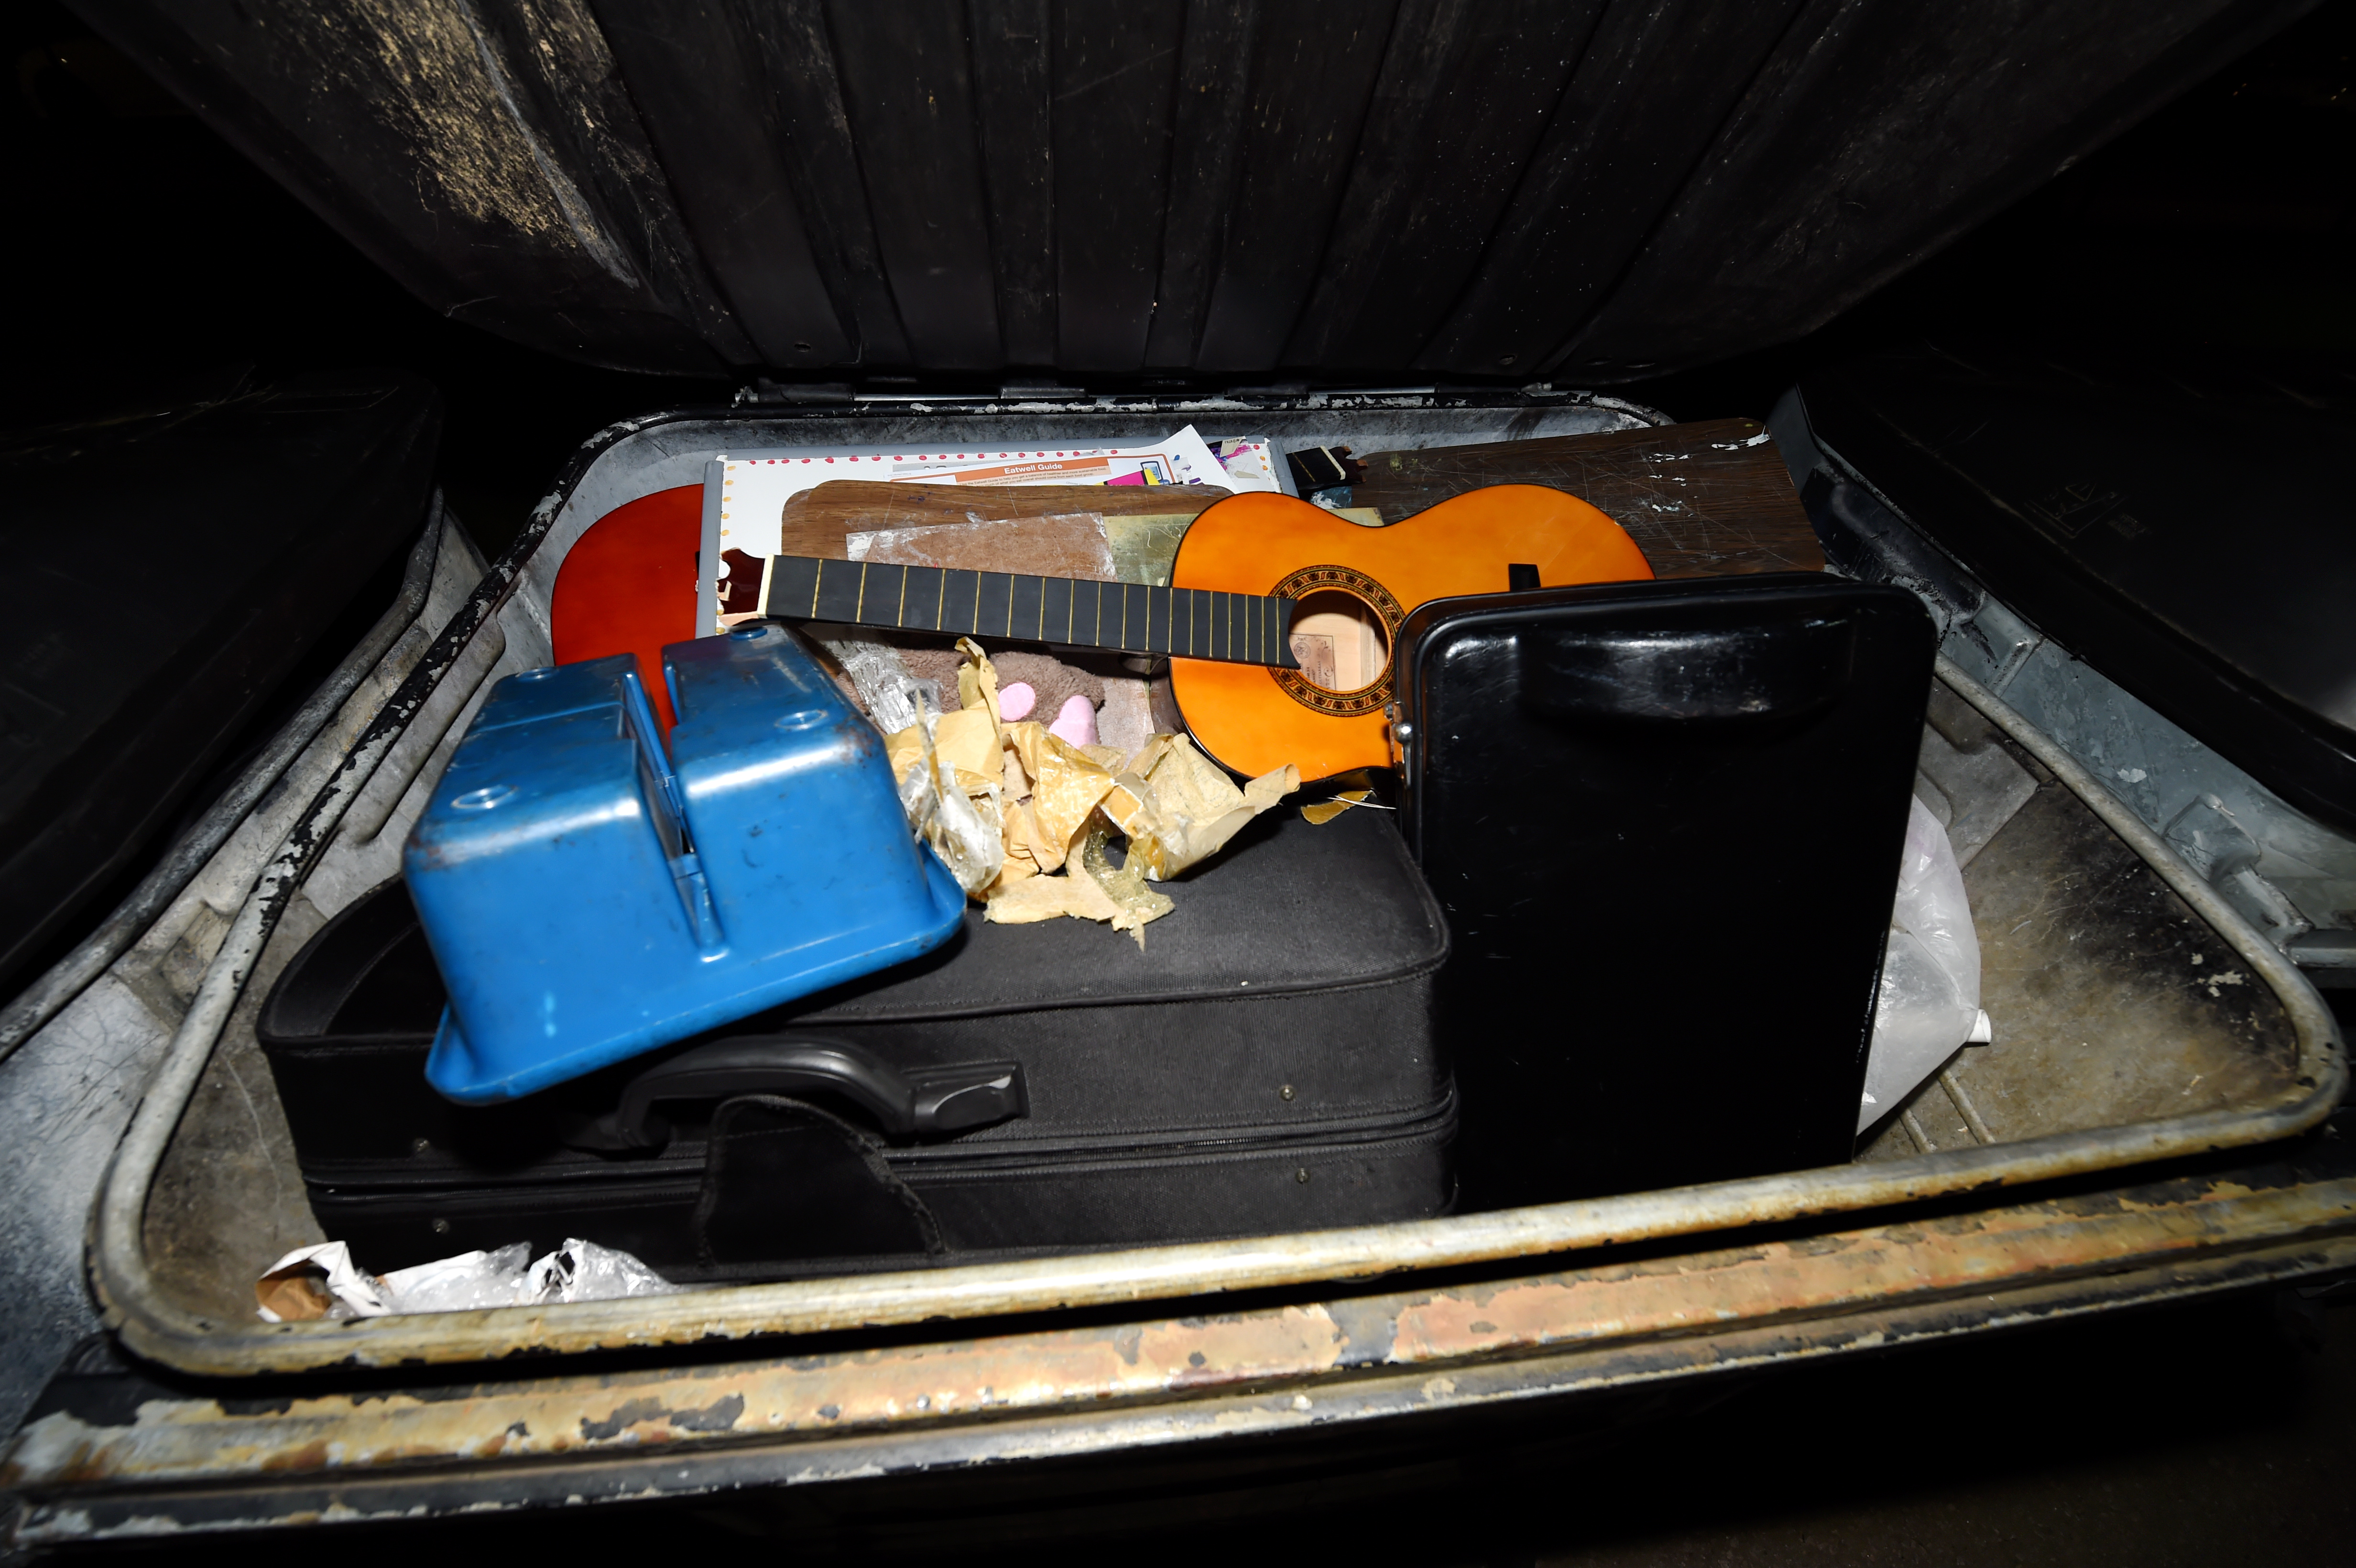 Musical instruments in rubbish bins at Northfield Academy

Picture by KENNY ELRICK